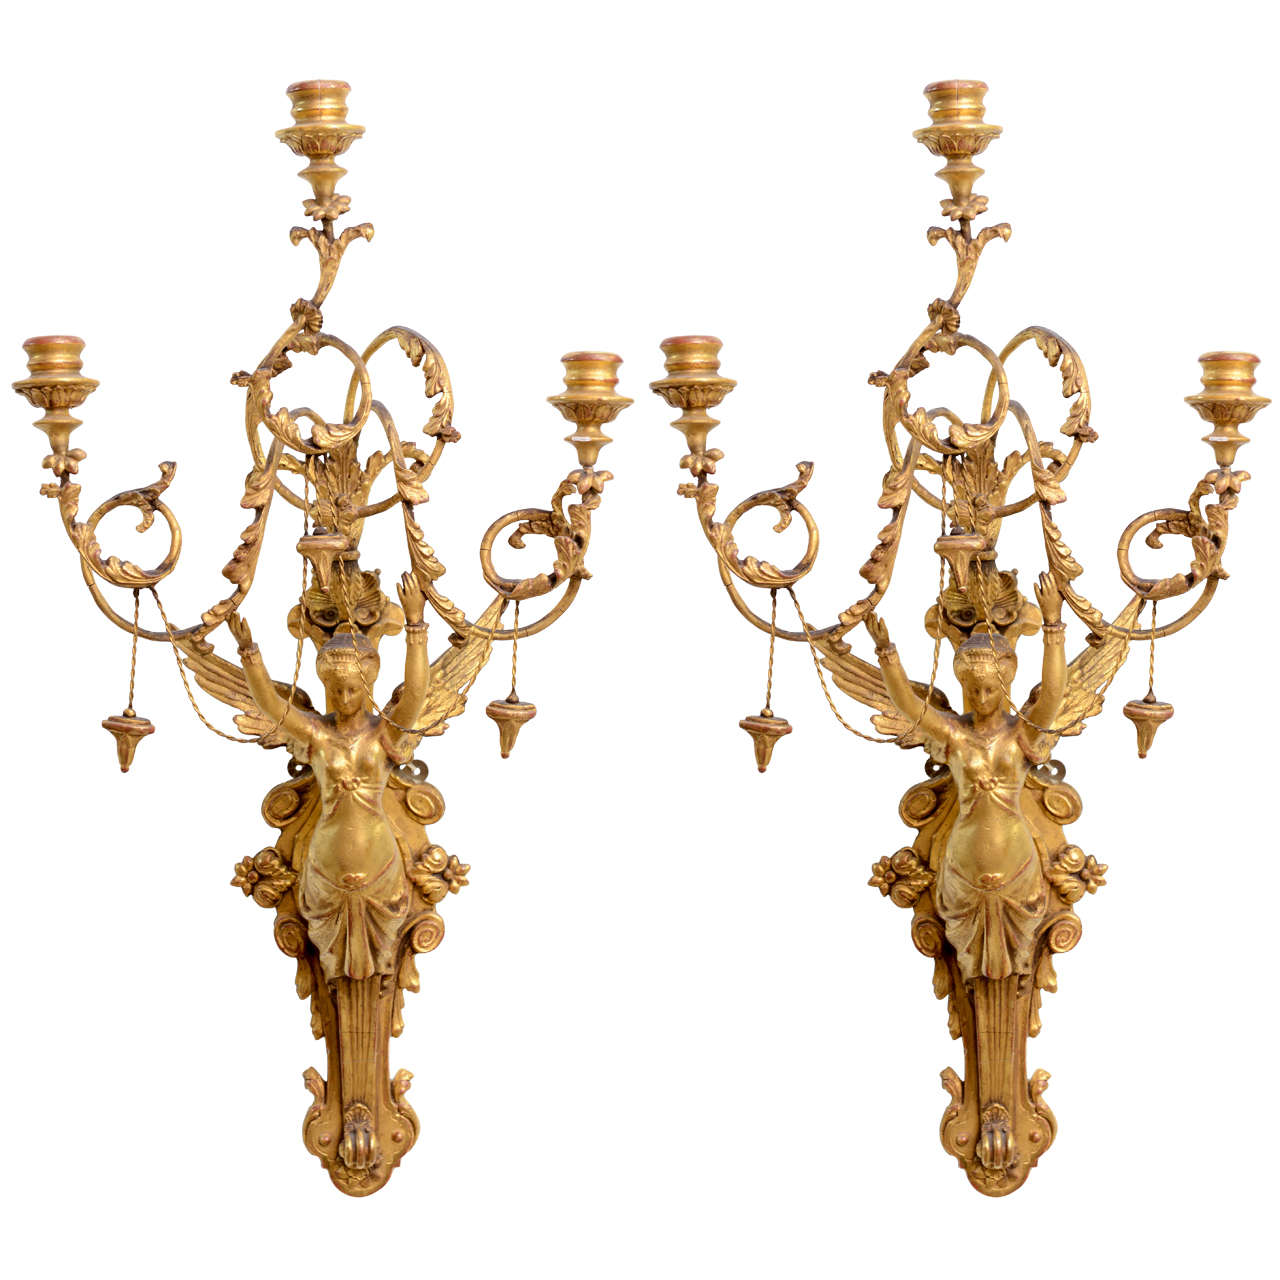 Exceptional Pair of Italian Empire Giltwood Three-Light Wall Appliques For Sale